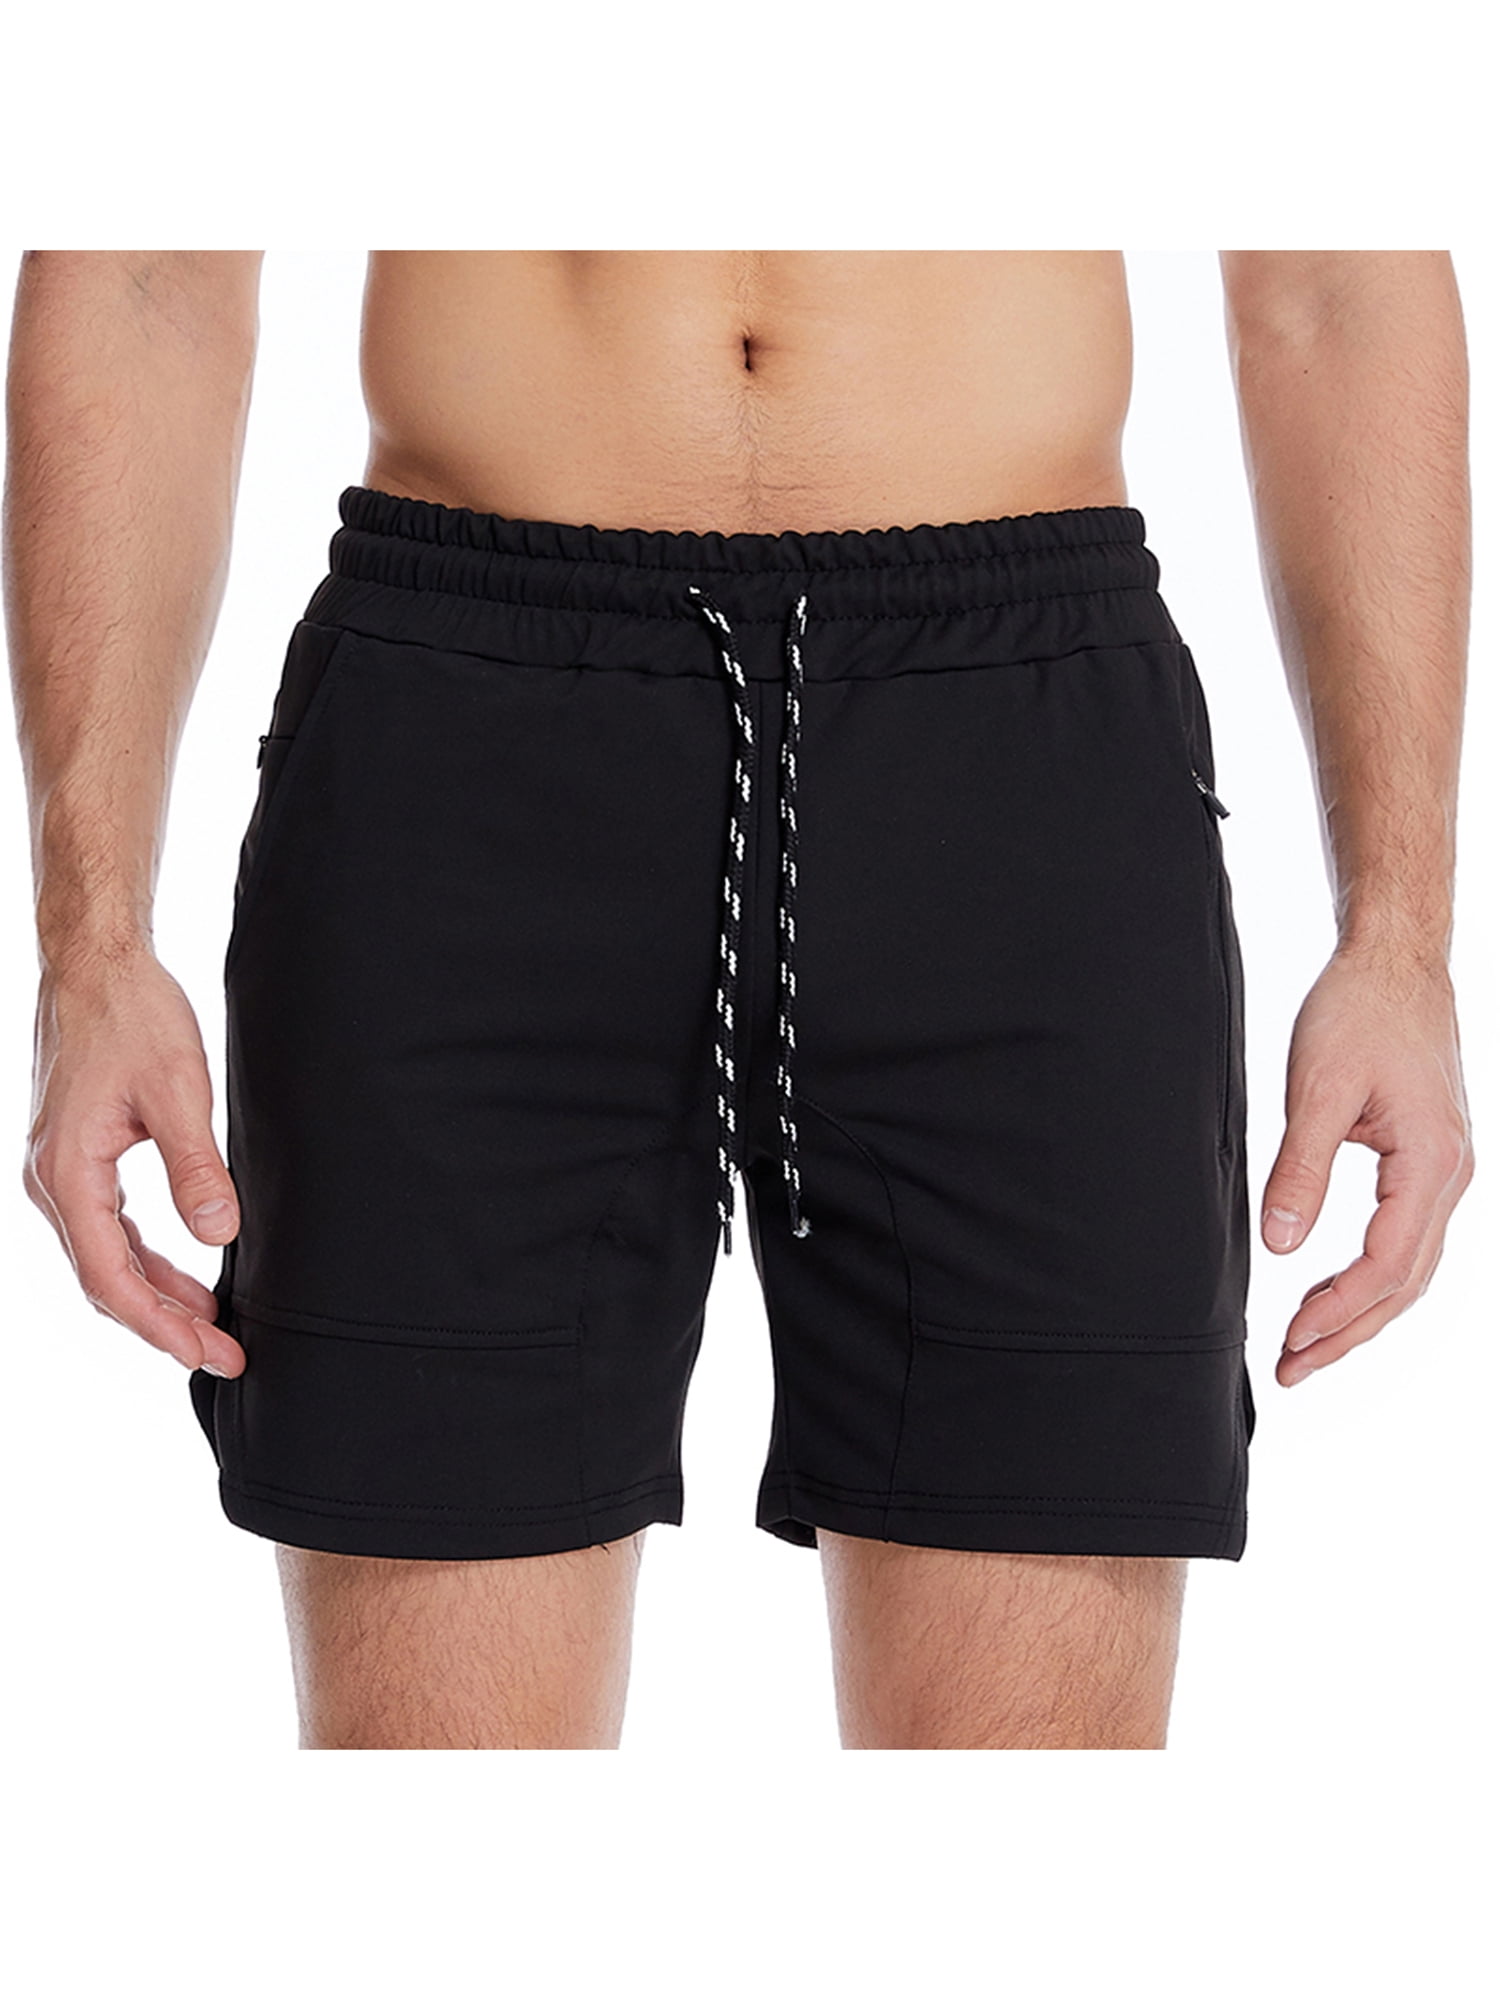 Mens Athletic Gym Sweat Shorts Quick Dry Running Workout Short Pants Trunks 